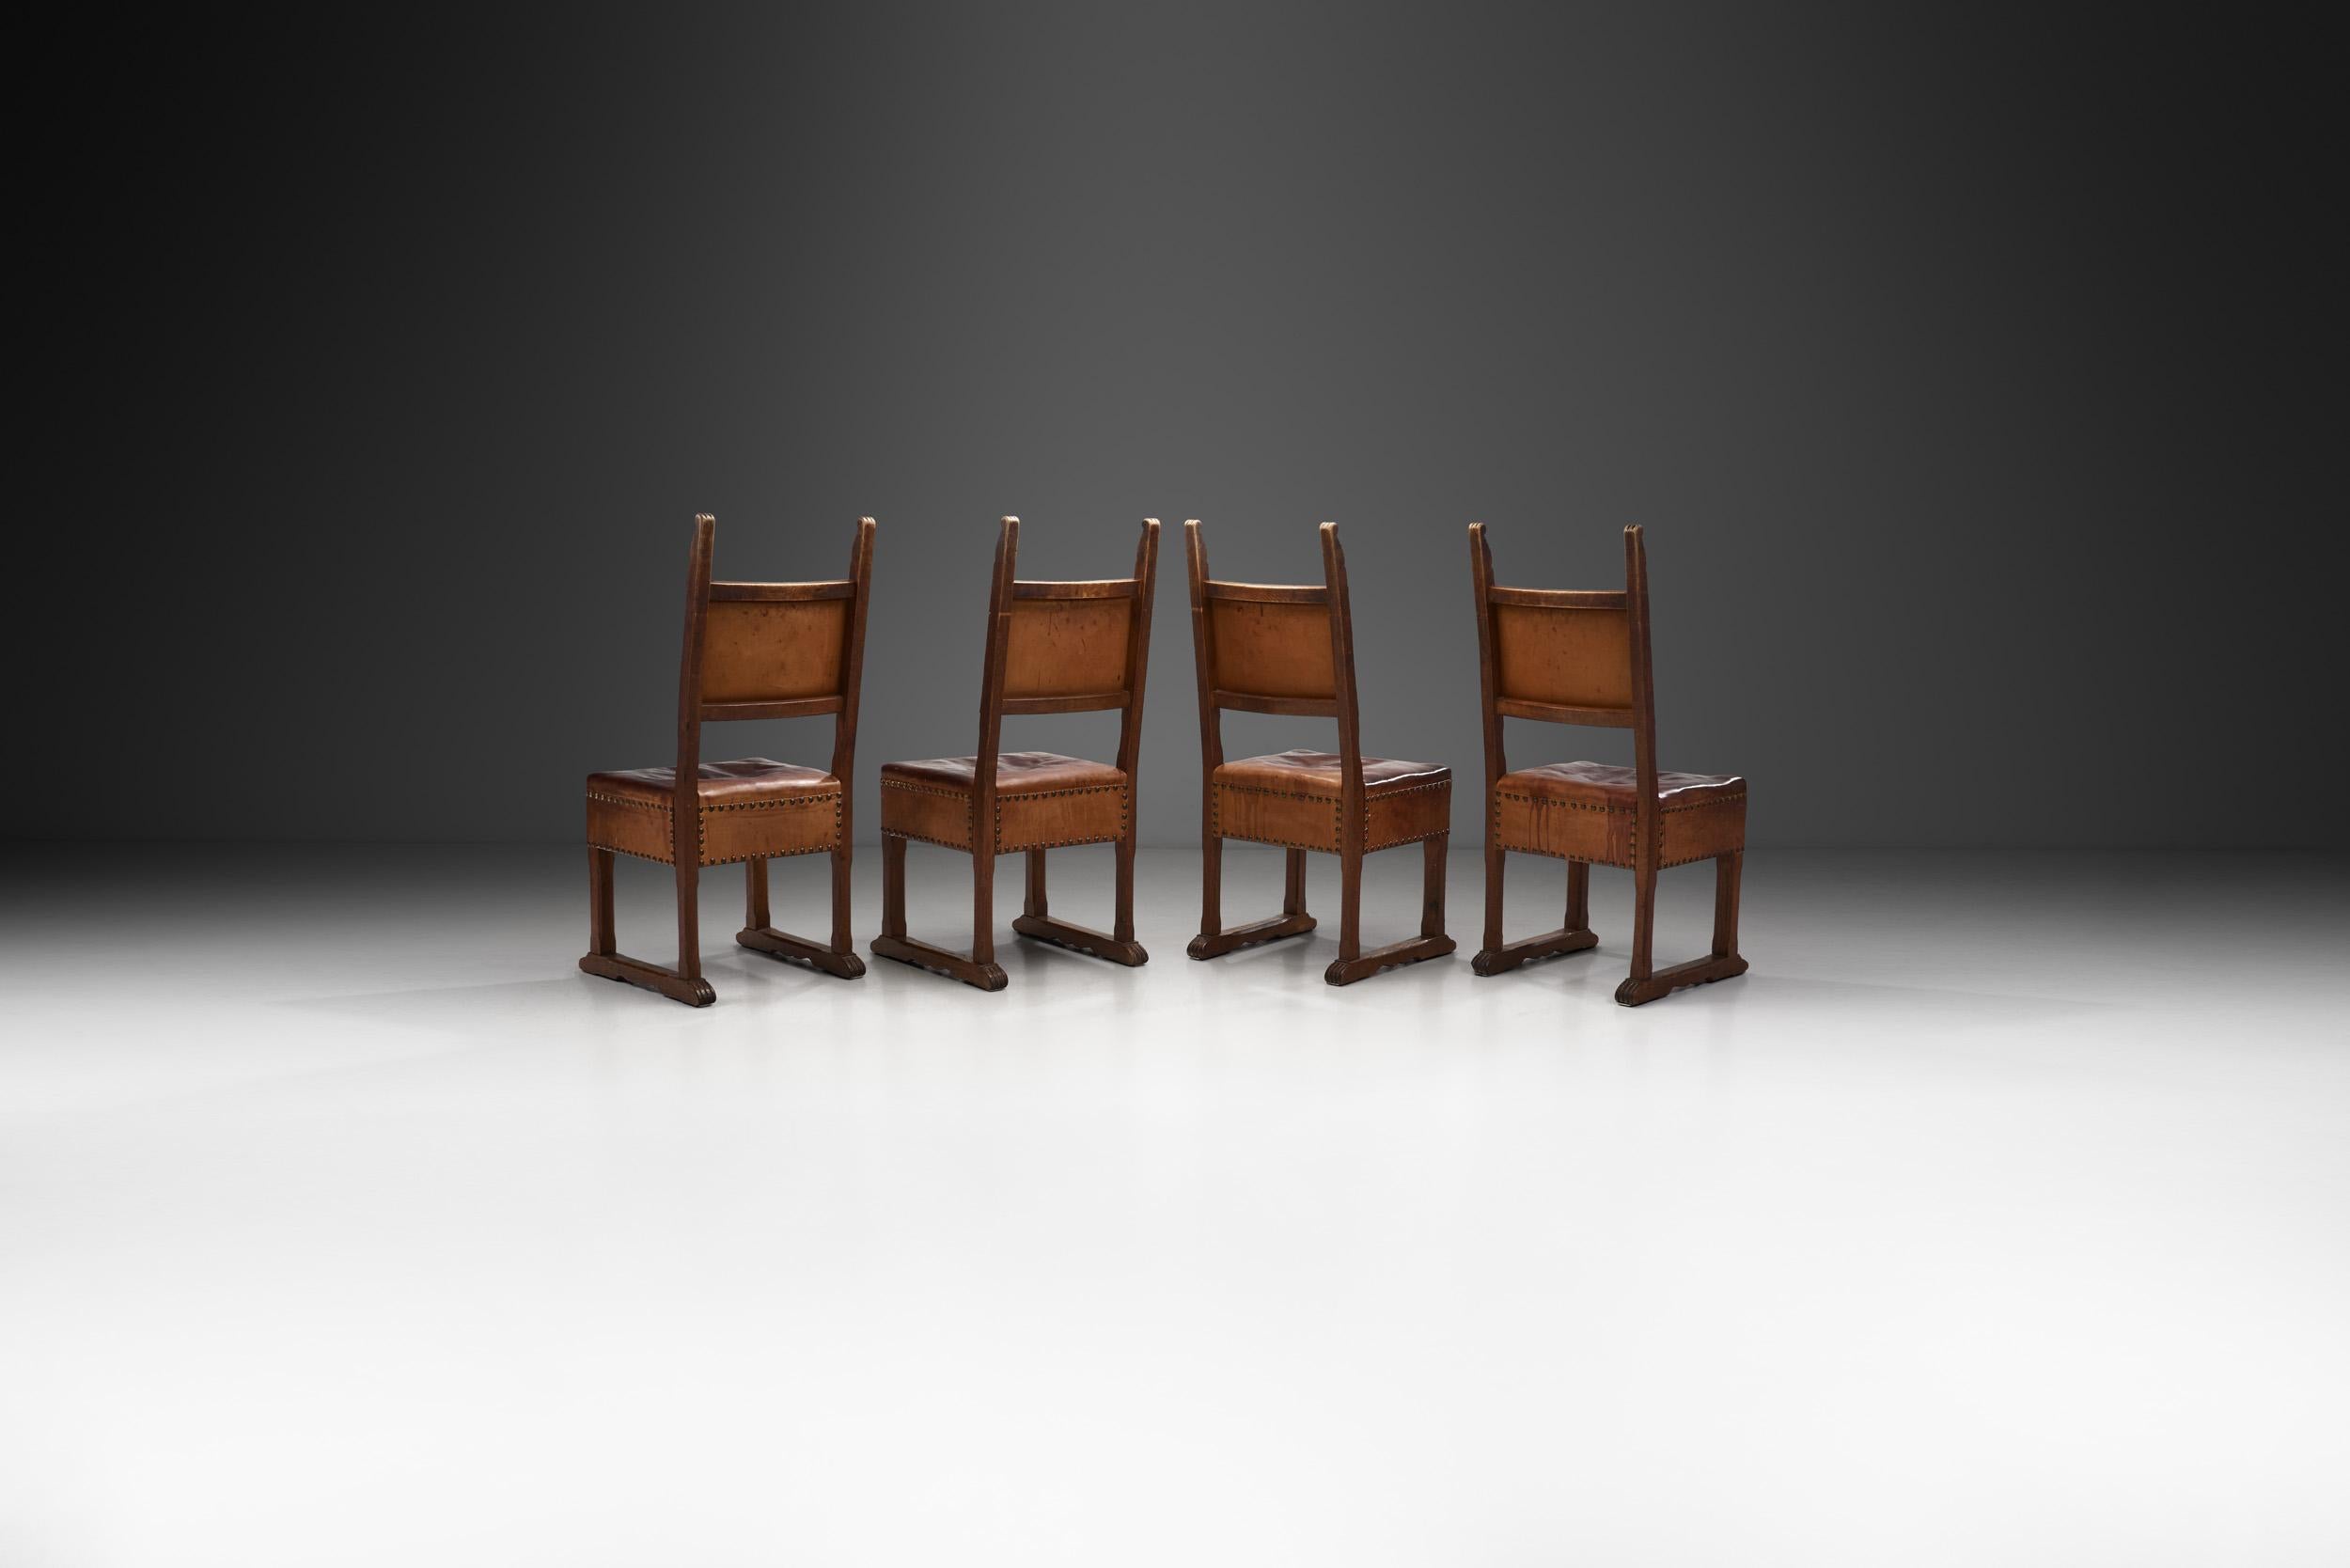 20th Century European Patinated Oak and Leather Chairs with Upholstery Tacks, Europe Ca 1900s